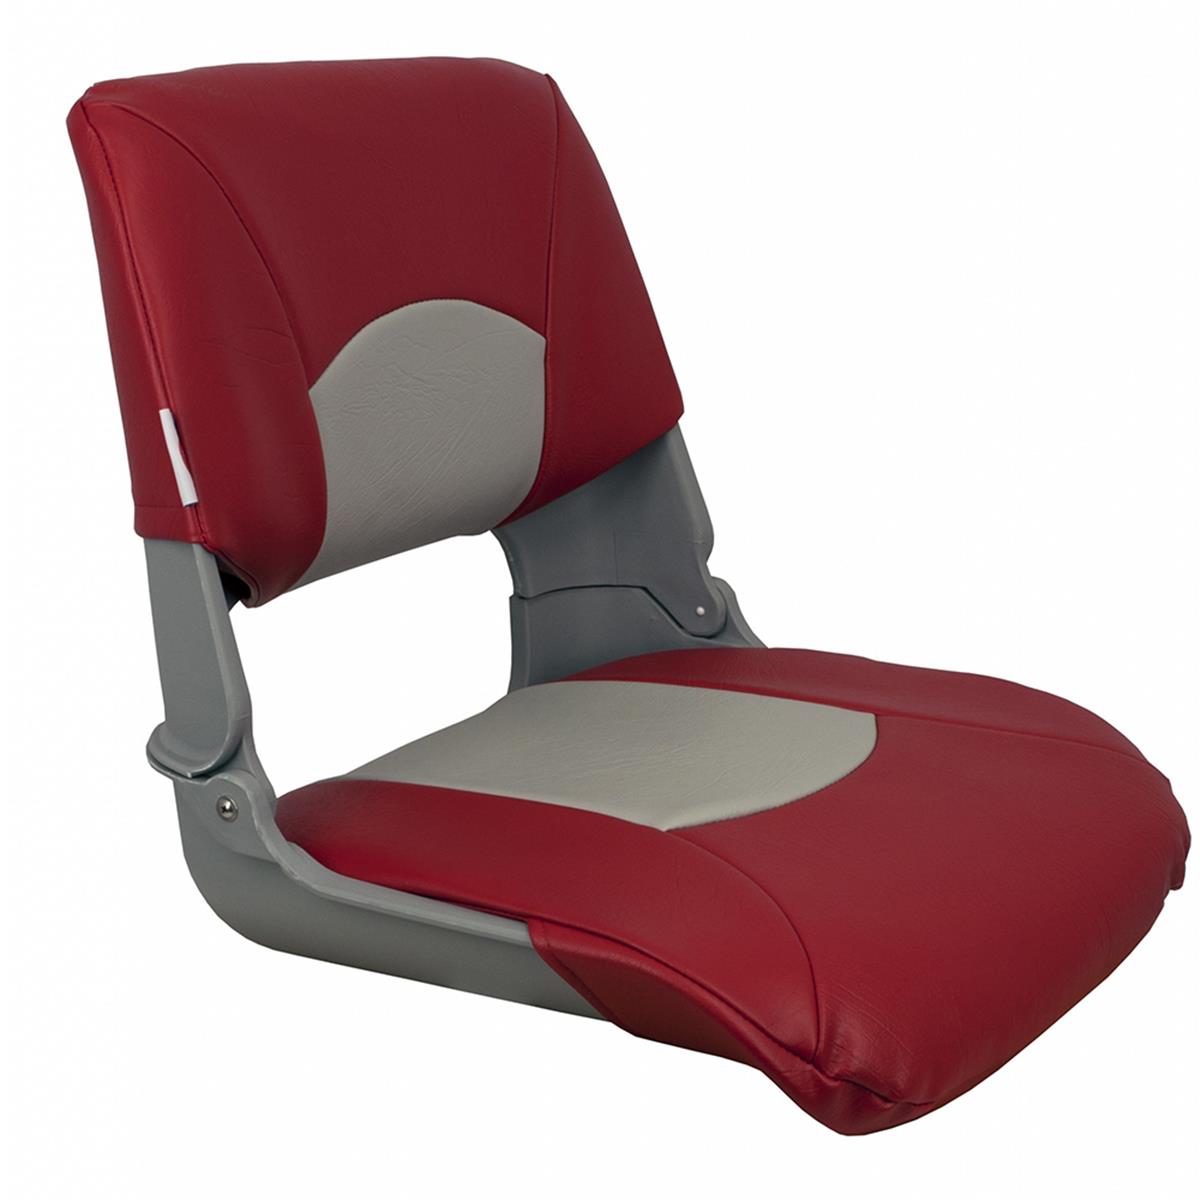 UPC 038132930766 product image for 1061018 Skipper Standard Seat Fold Down, Grey & Red | upcitemdb.com